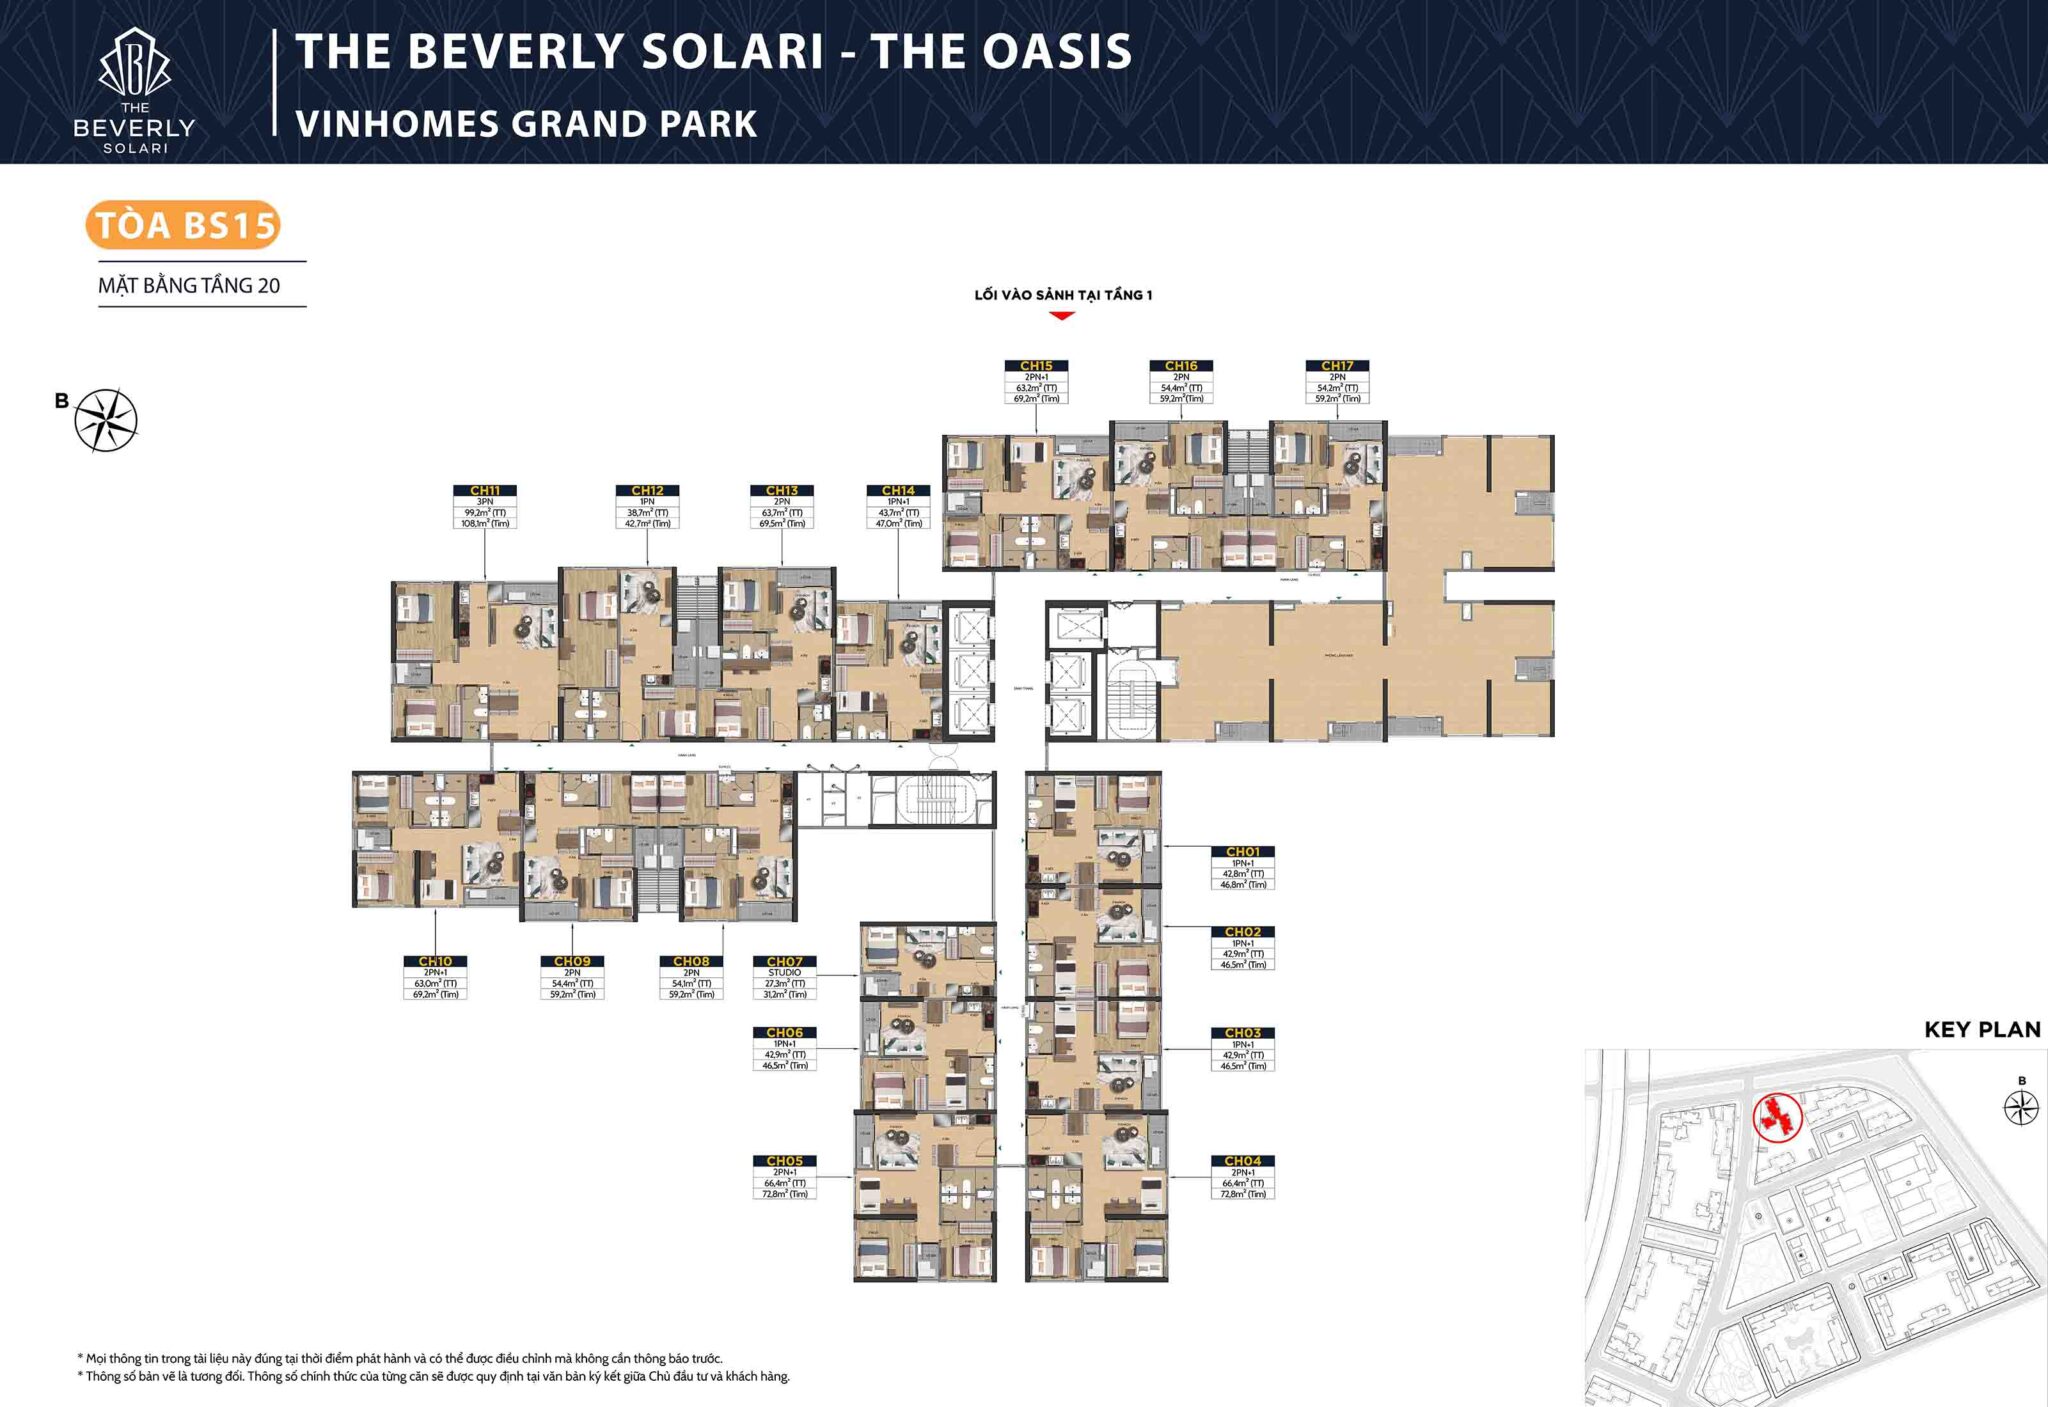 Mặt bằng BS15 The Oasis Beverly Solari tầng 6-34